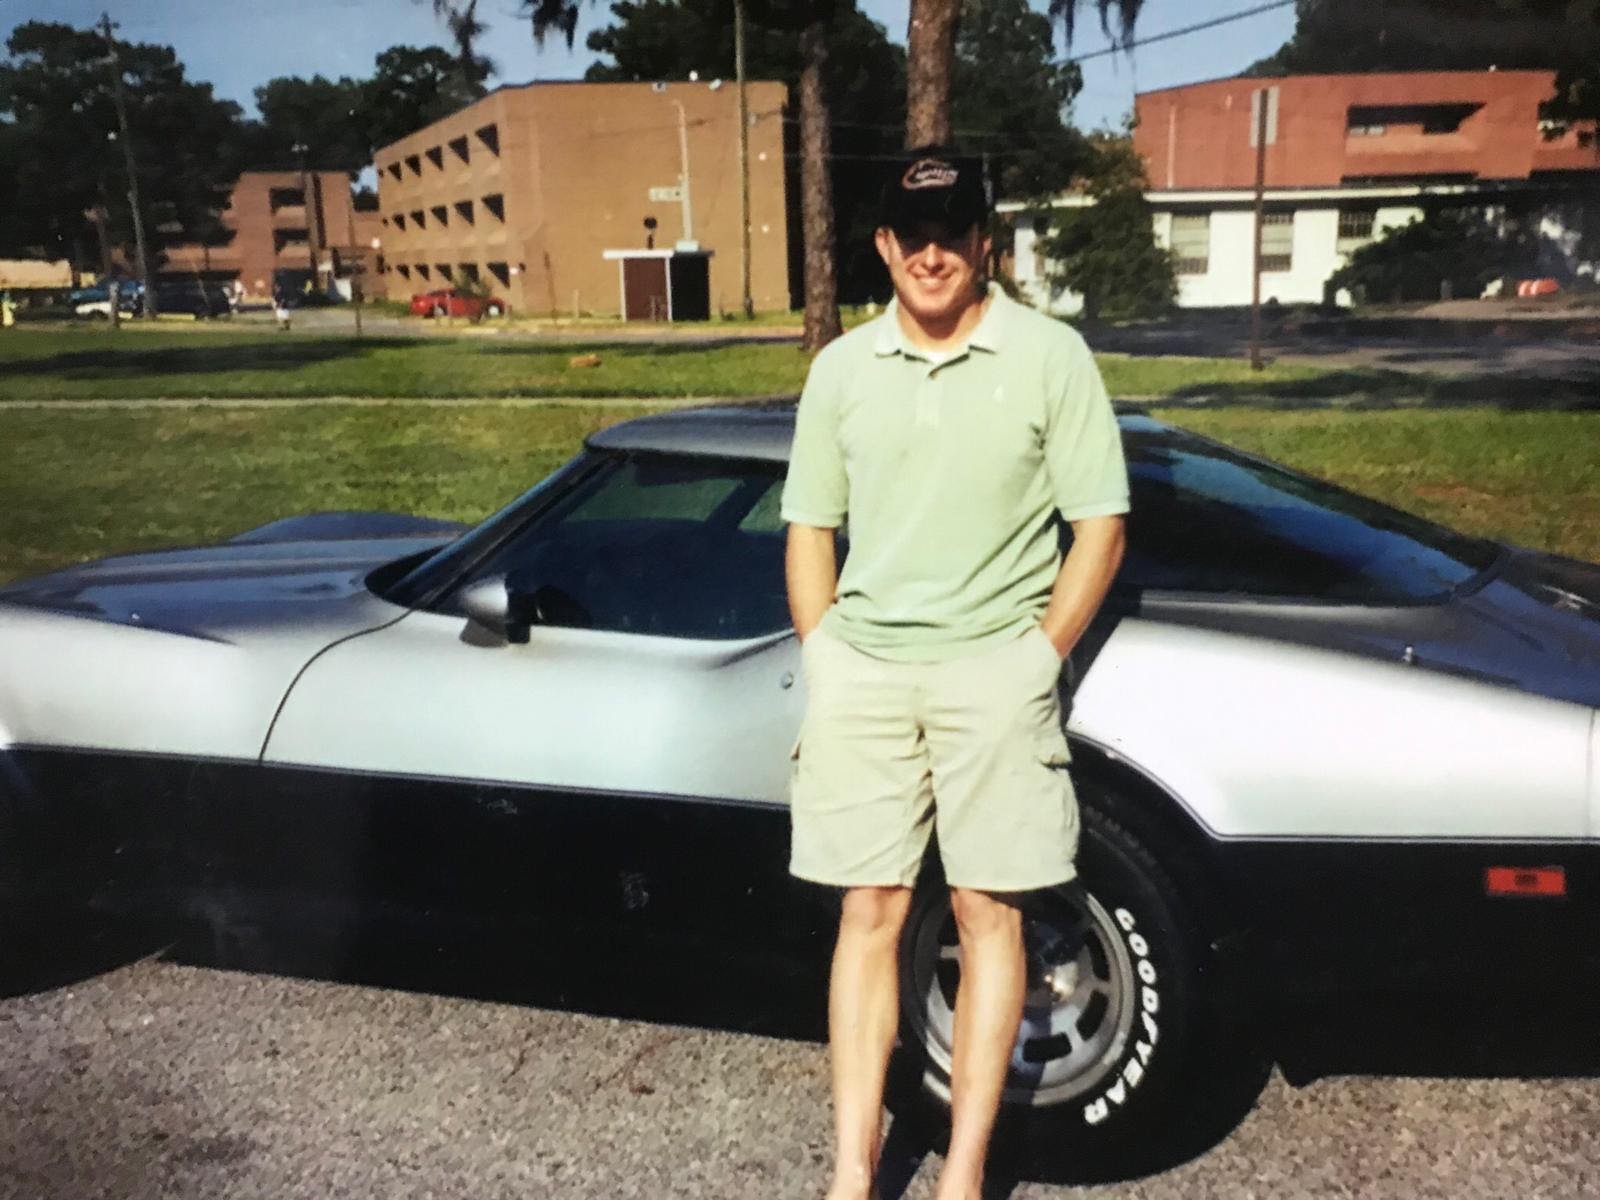 Sergeant Bradley Crose with the Corvette he was planning to rebuild. Photo courtesy of retired Master Sergeant Eric Stebner.